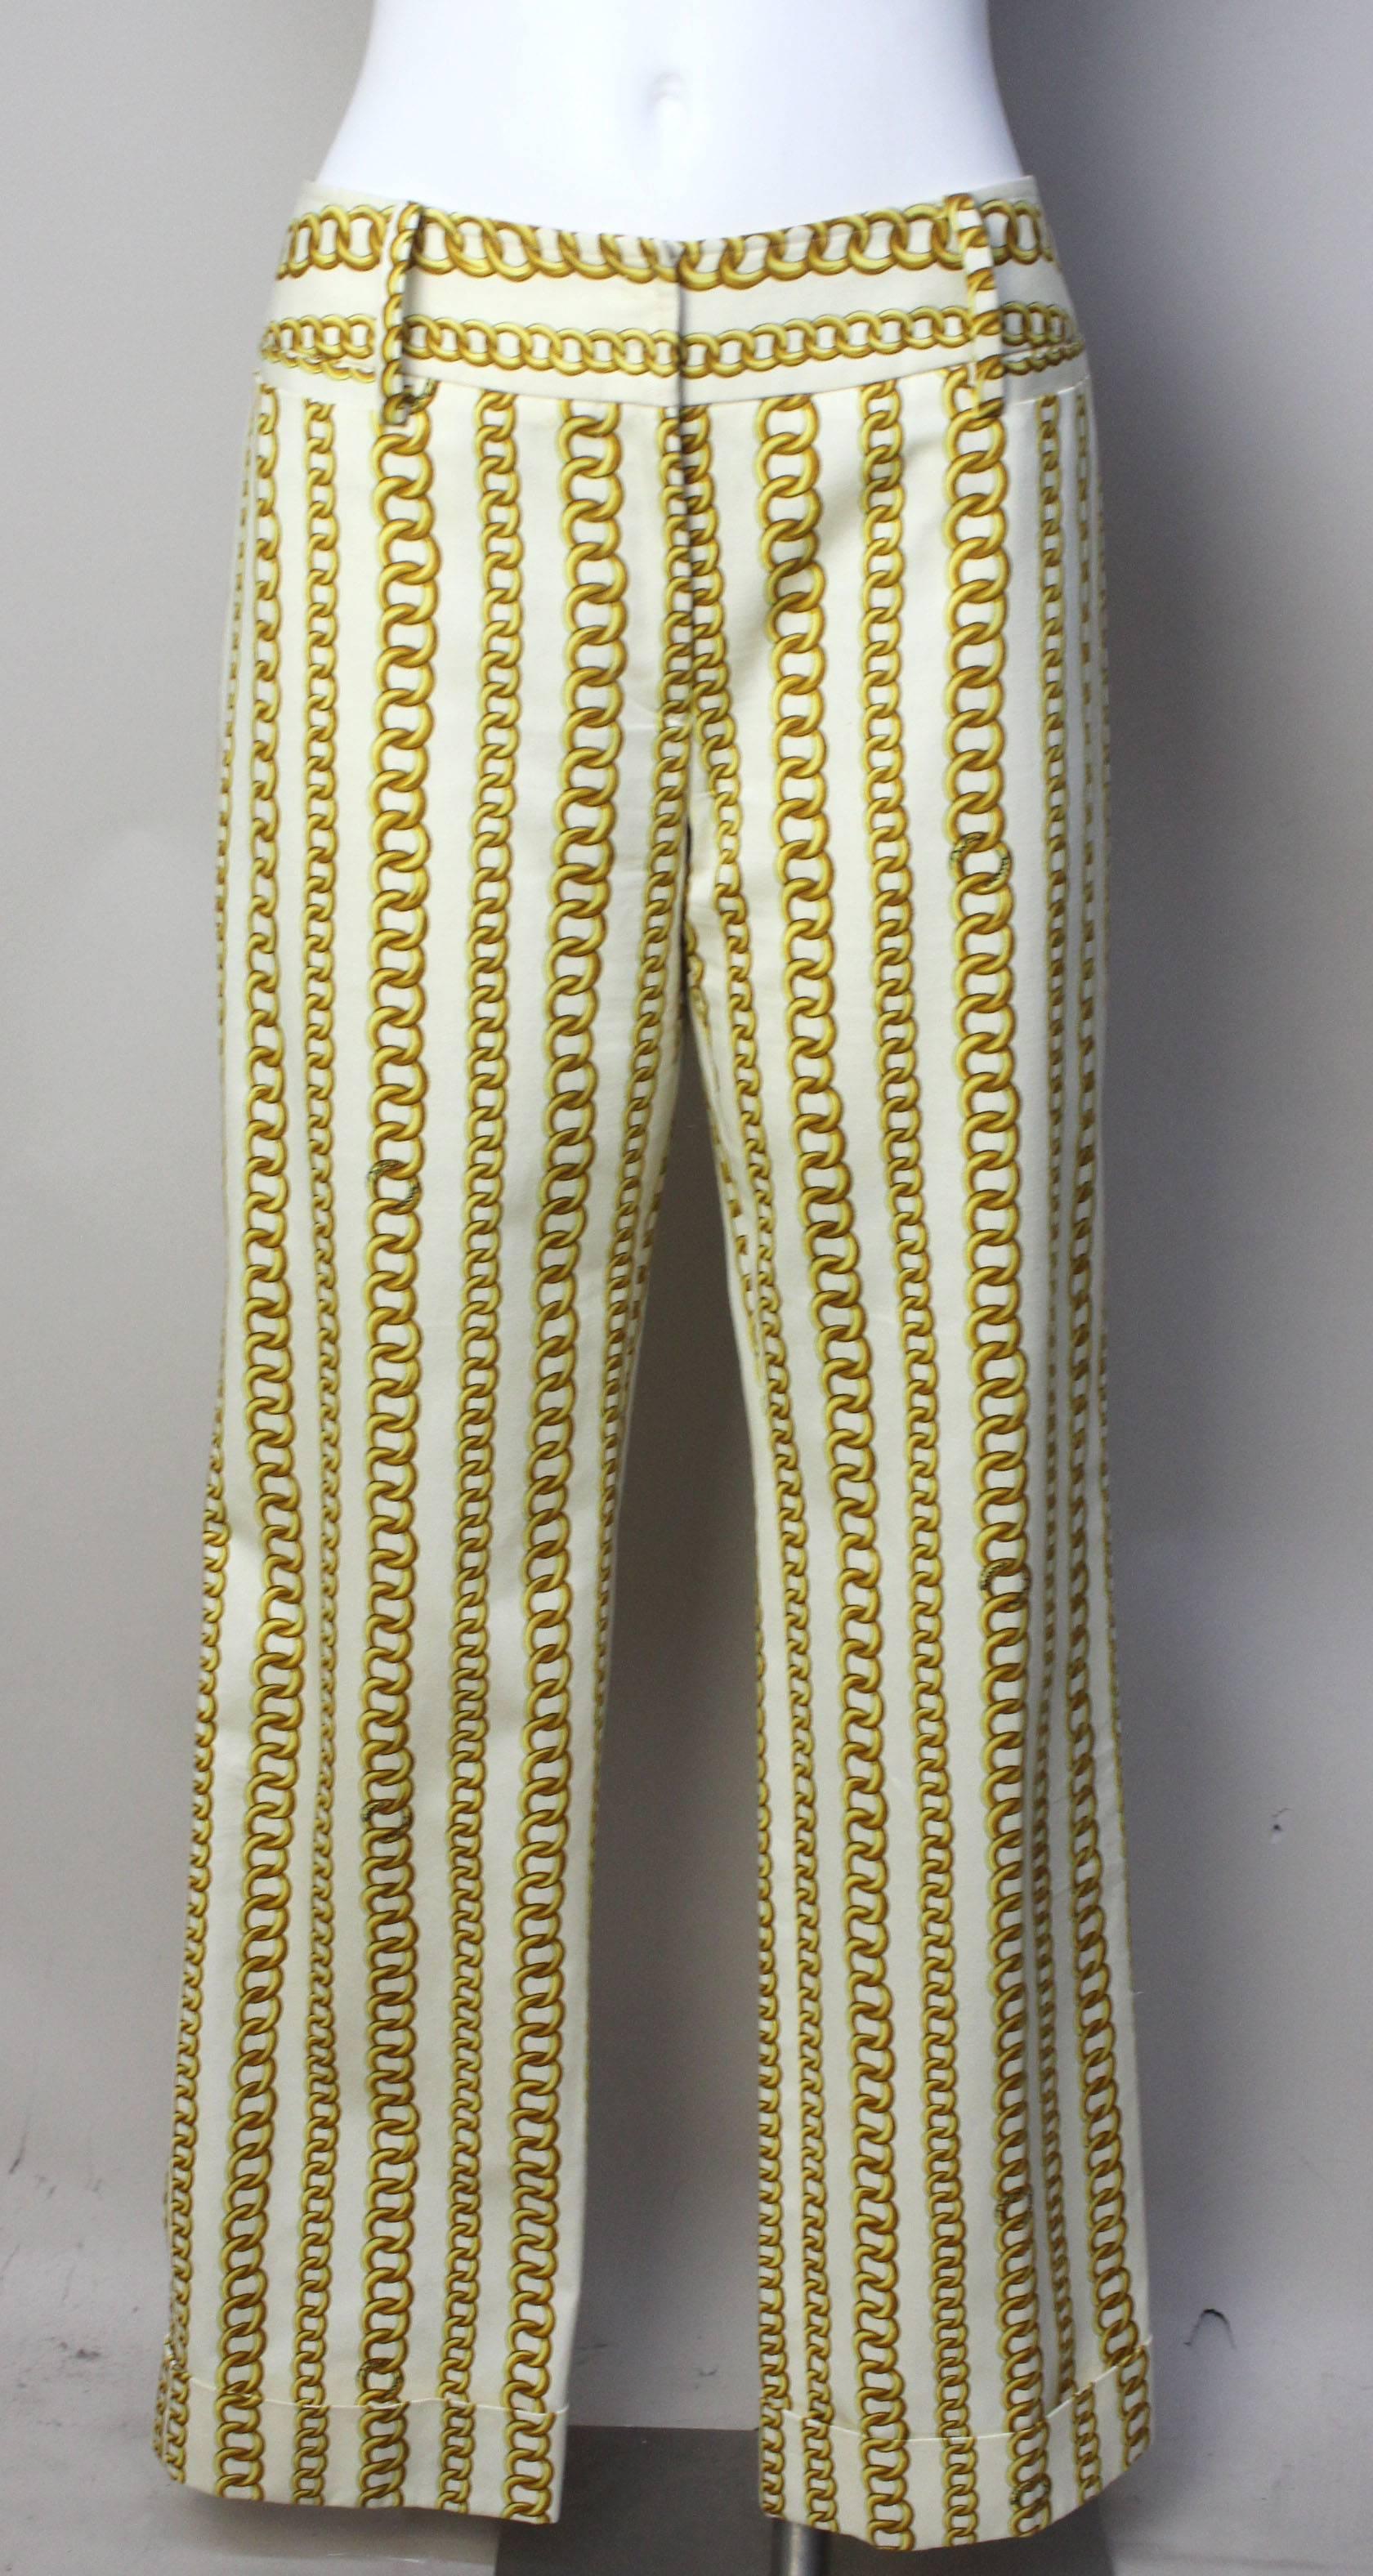 The pattern on these pants are whimsical like so many of Dolce/Gabbana's designs. It has bold trompe l'oiel vertical gold chains with the designers signature incorporated in the links. The fit is slightly low rise with wide belt loops. The pants